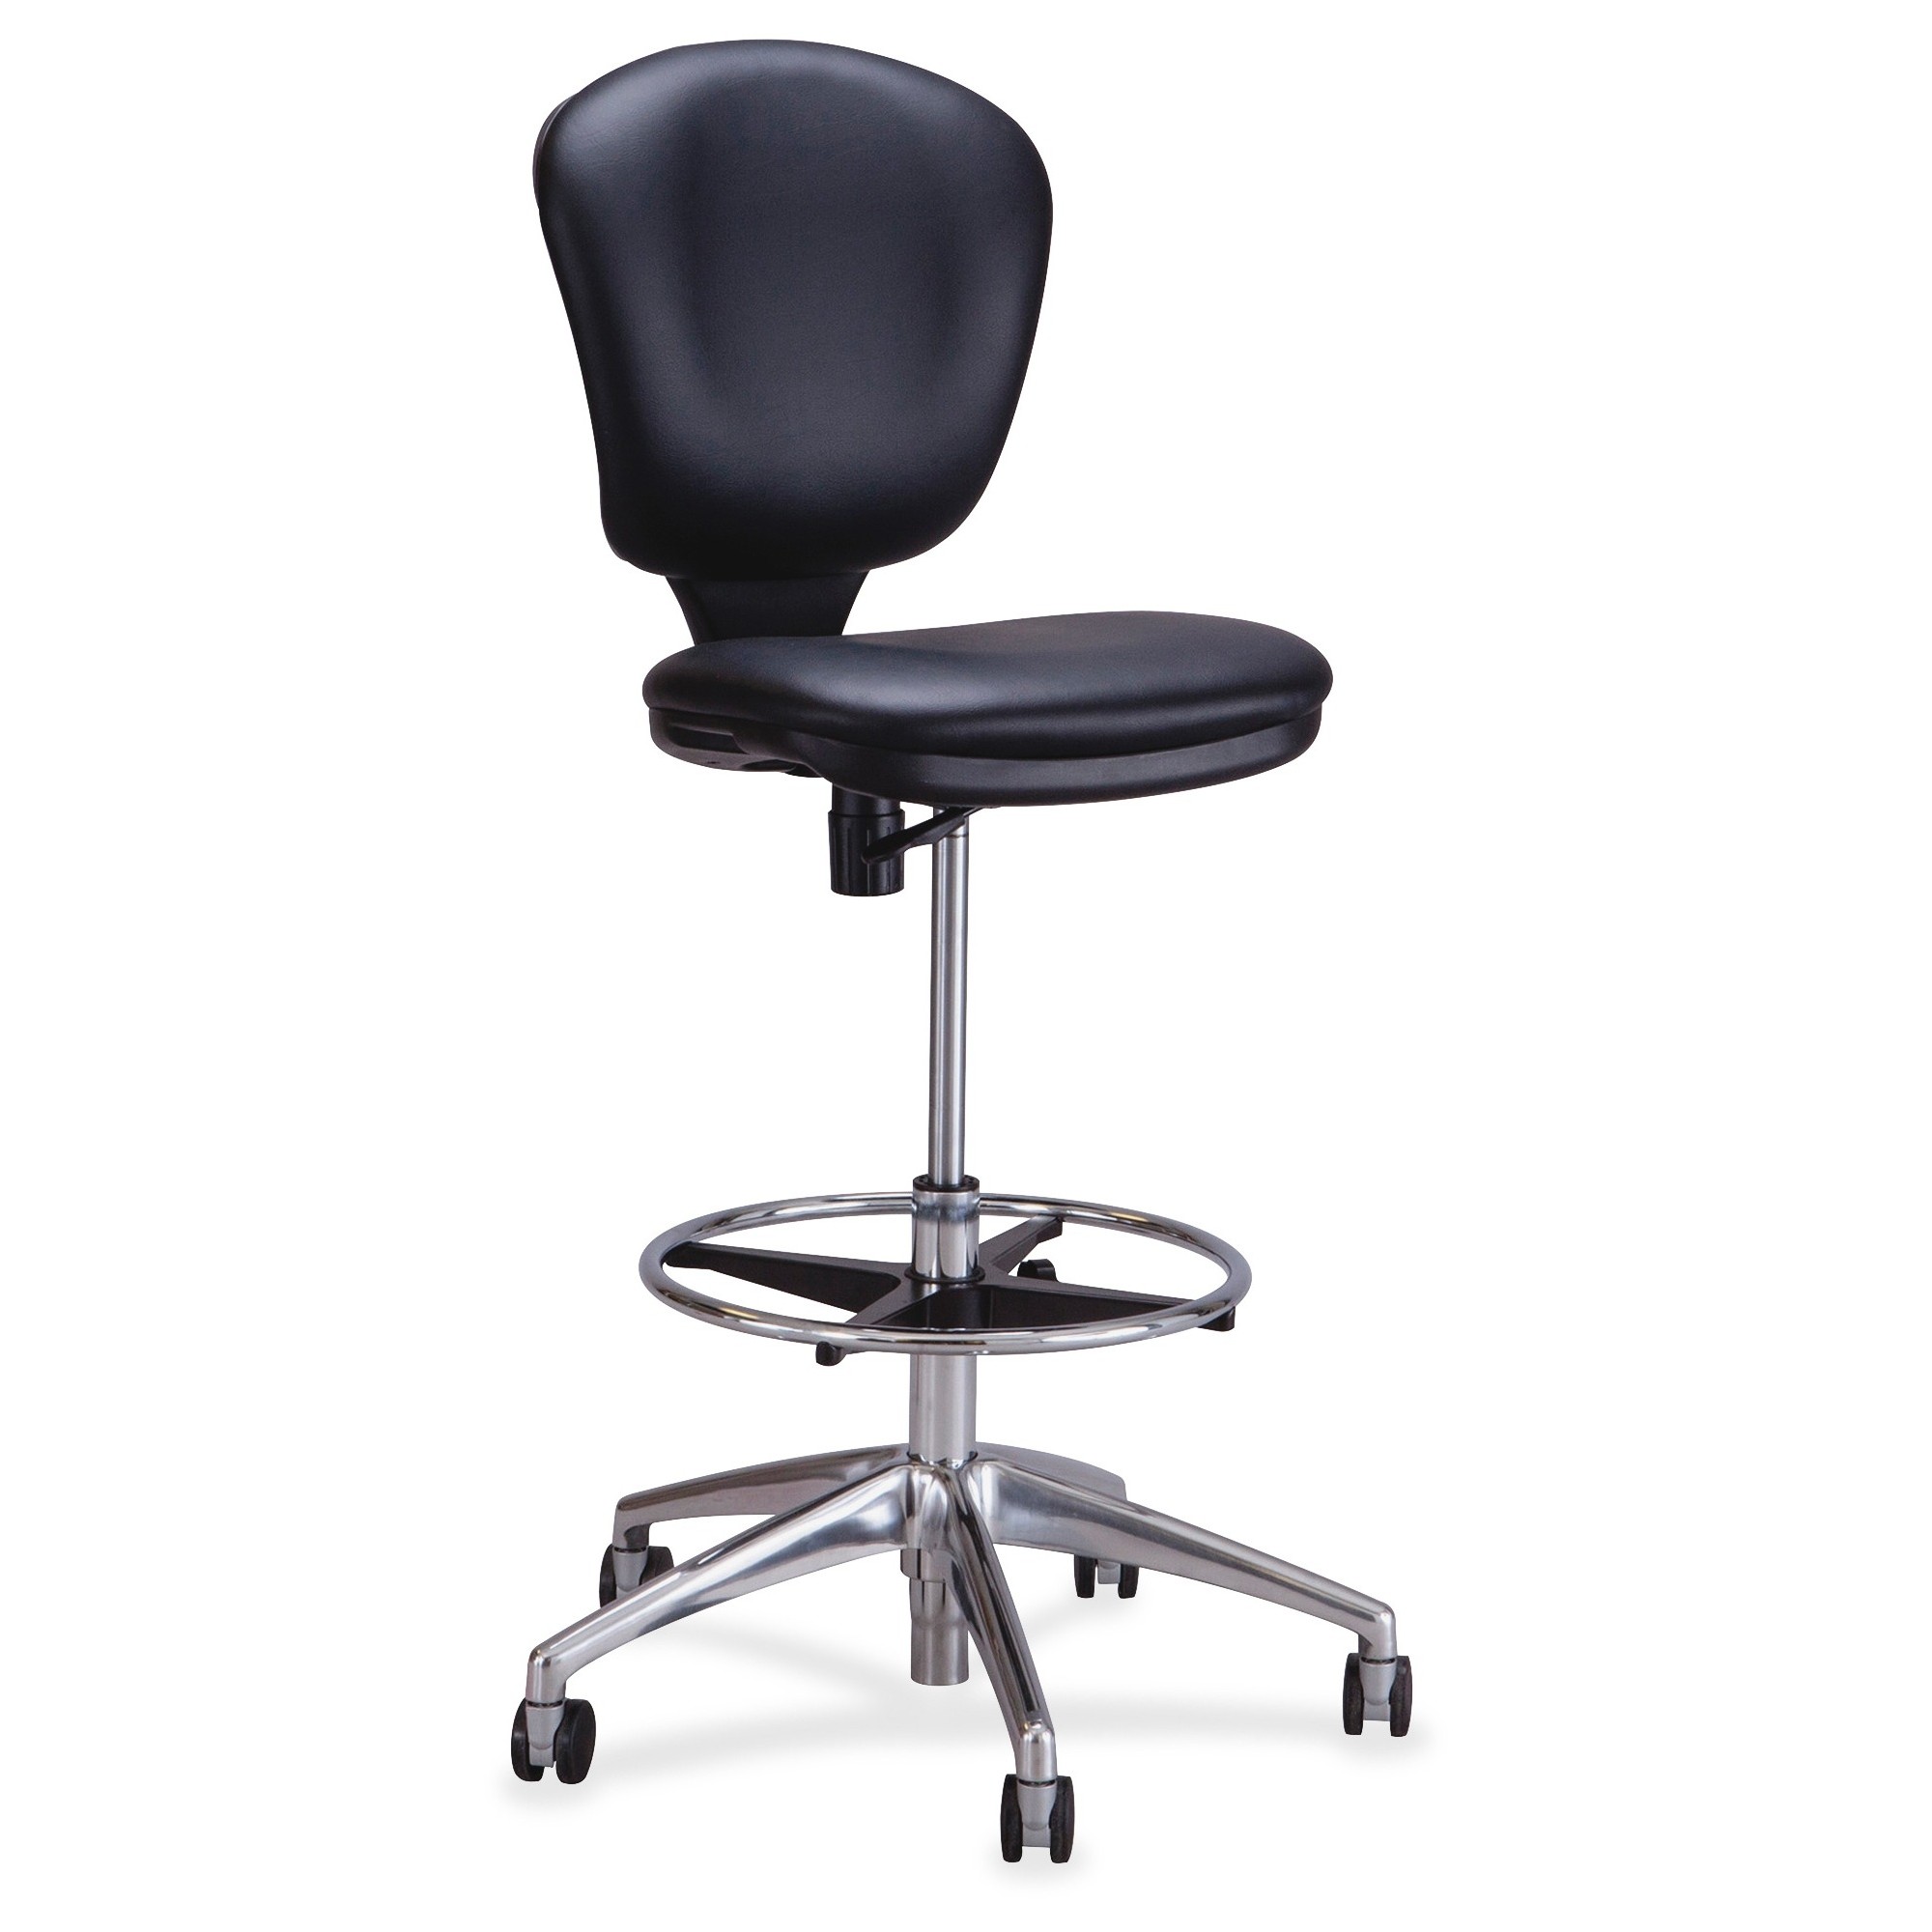 Metro Collection Extended-Height Chair, Supports Up to 250 lb, 23" to 33" Seat Height, Black Seat/Back, Chrome Base